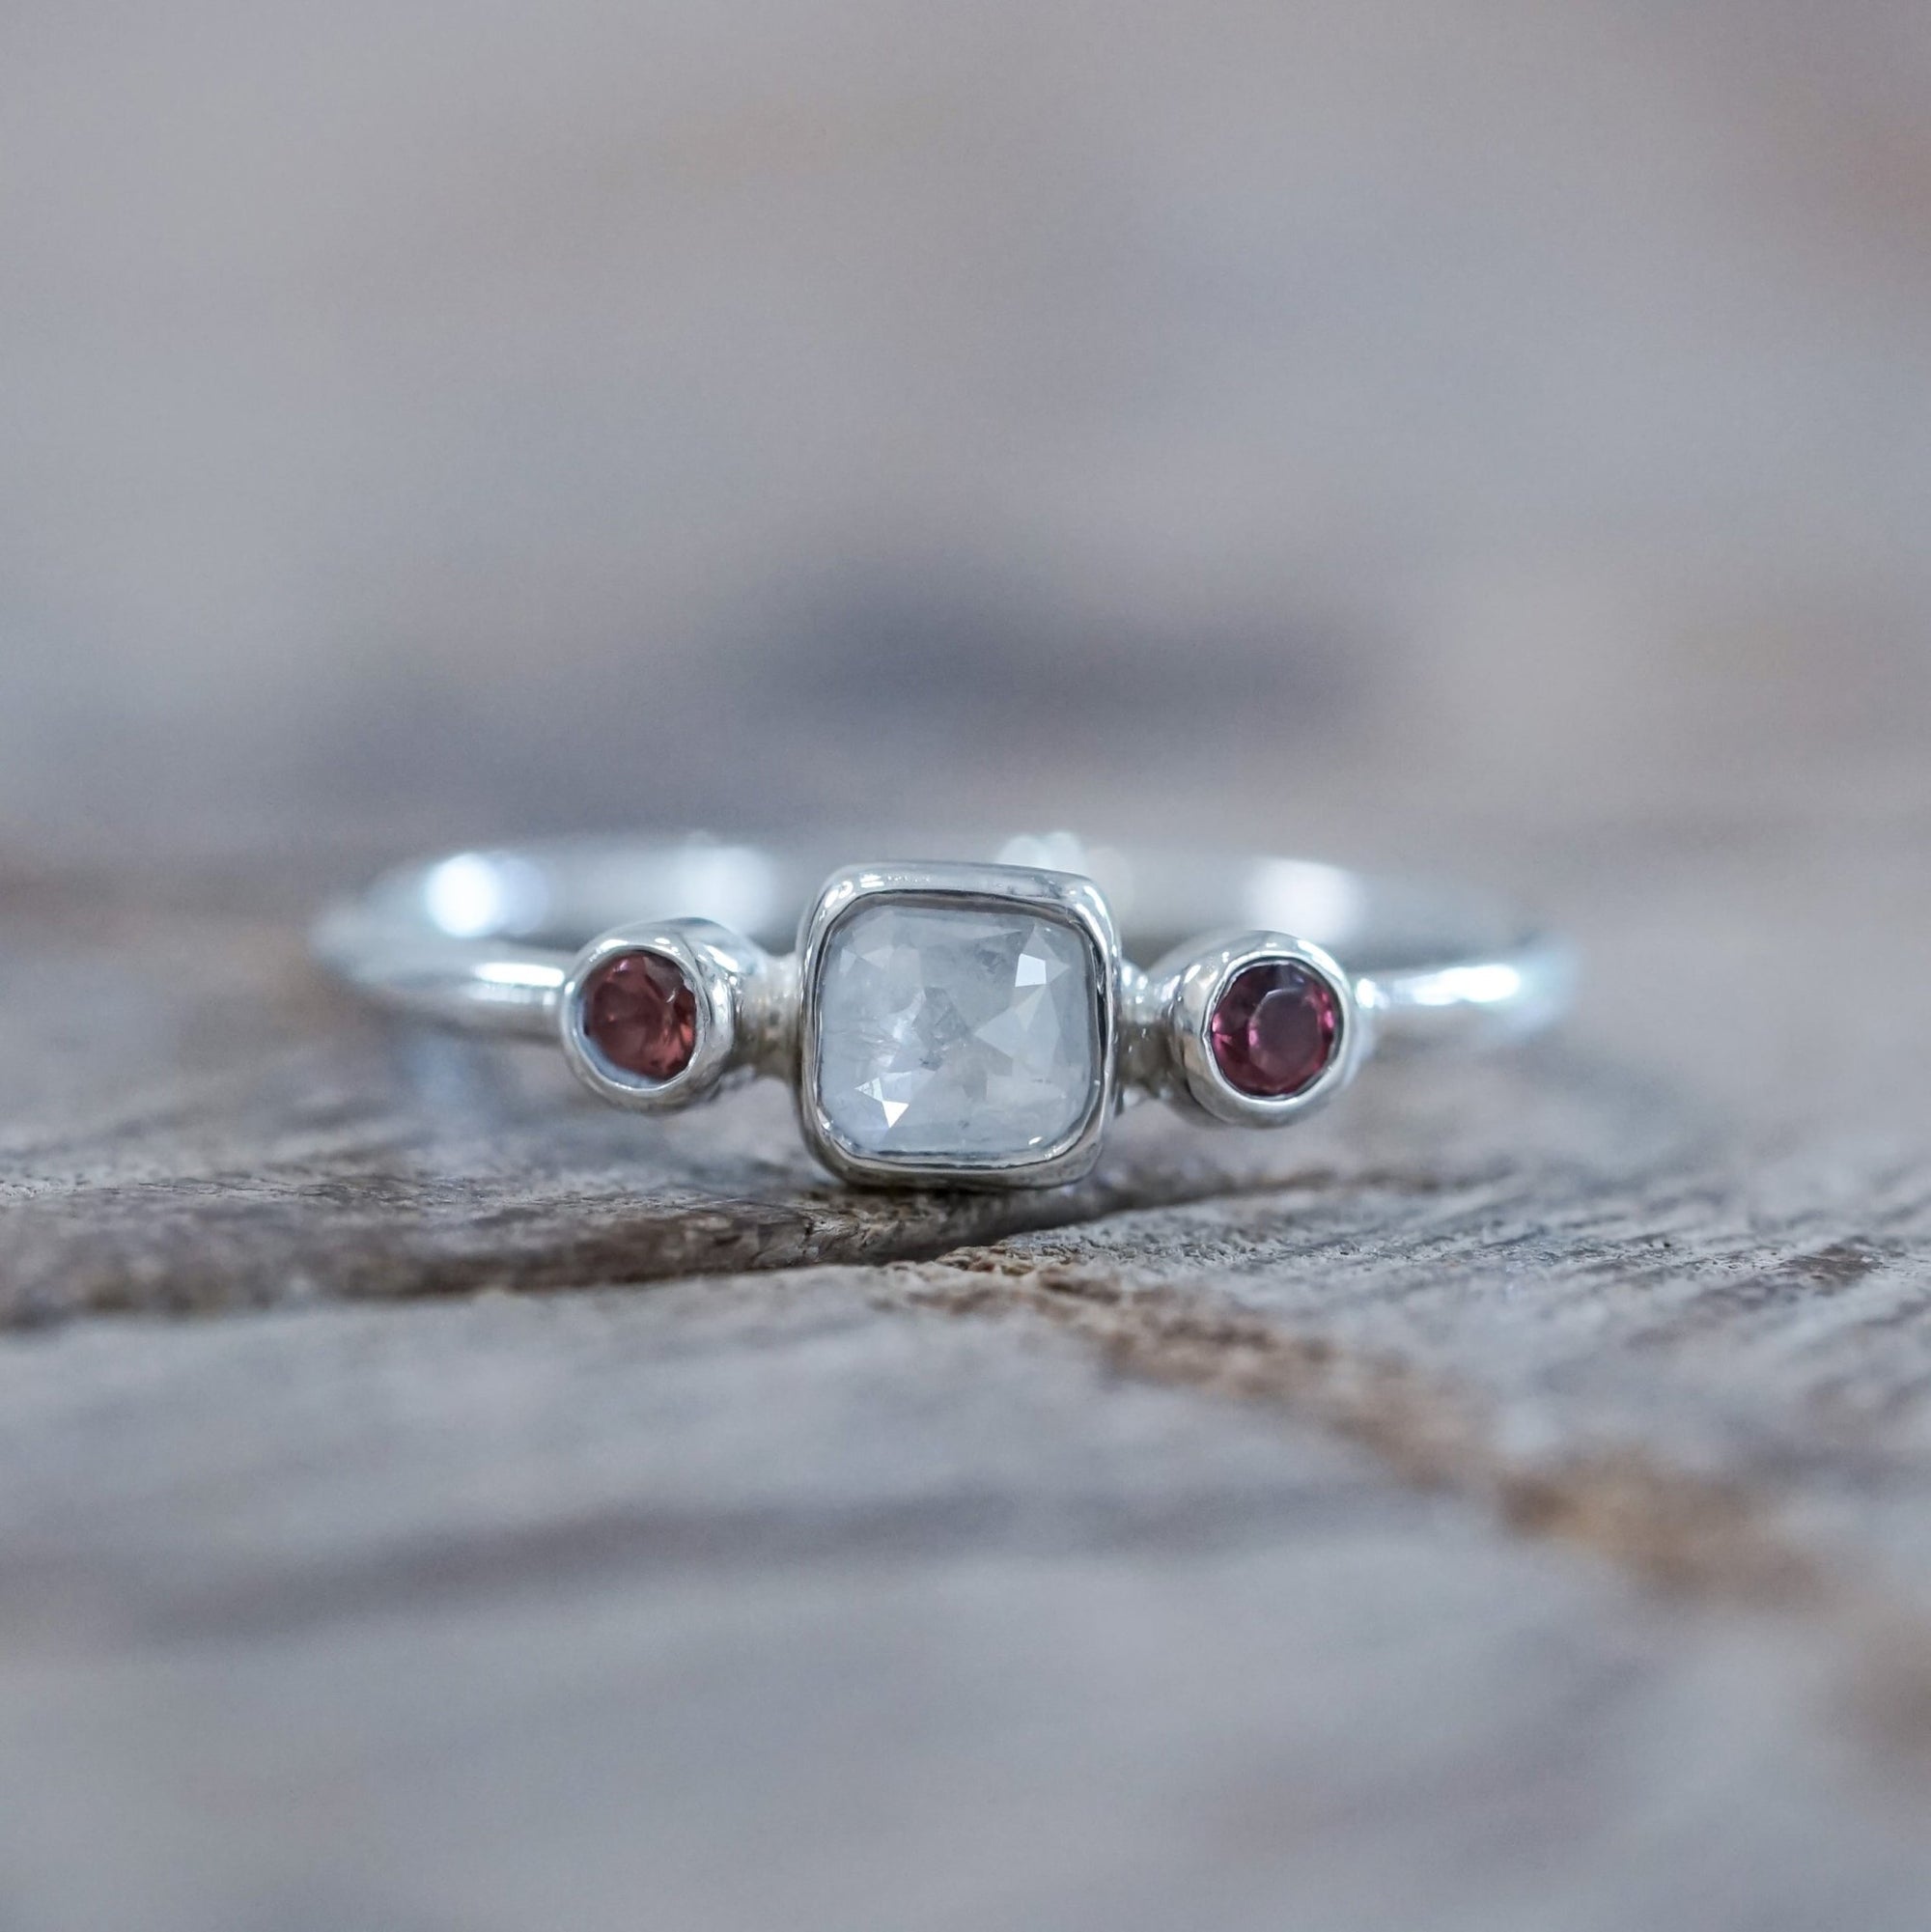 Milky Diamond and Garnet Ring - Gardens of the Sun | Ethical Jewelry